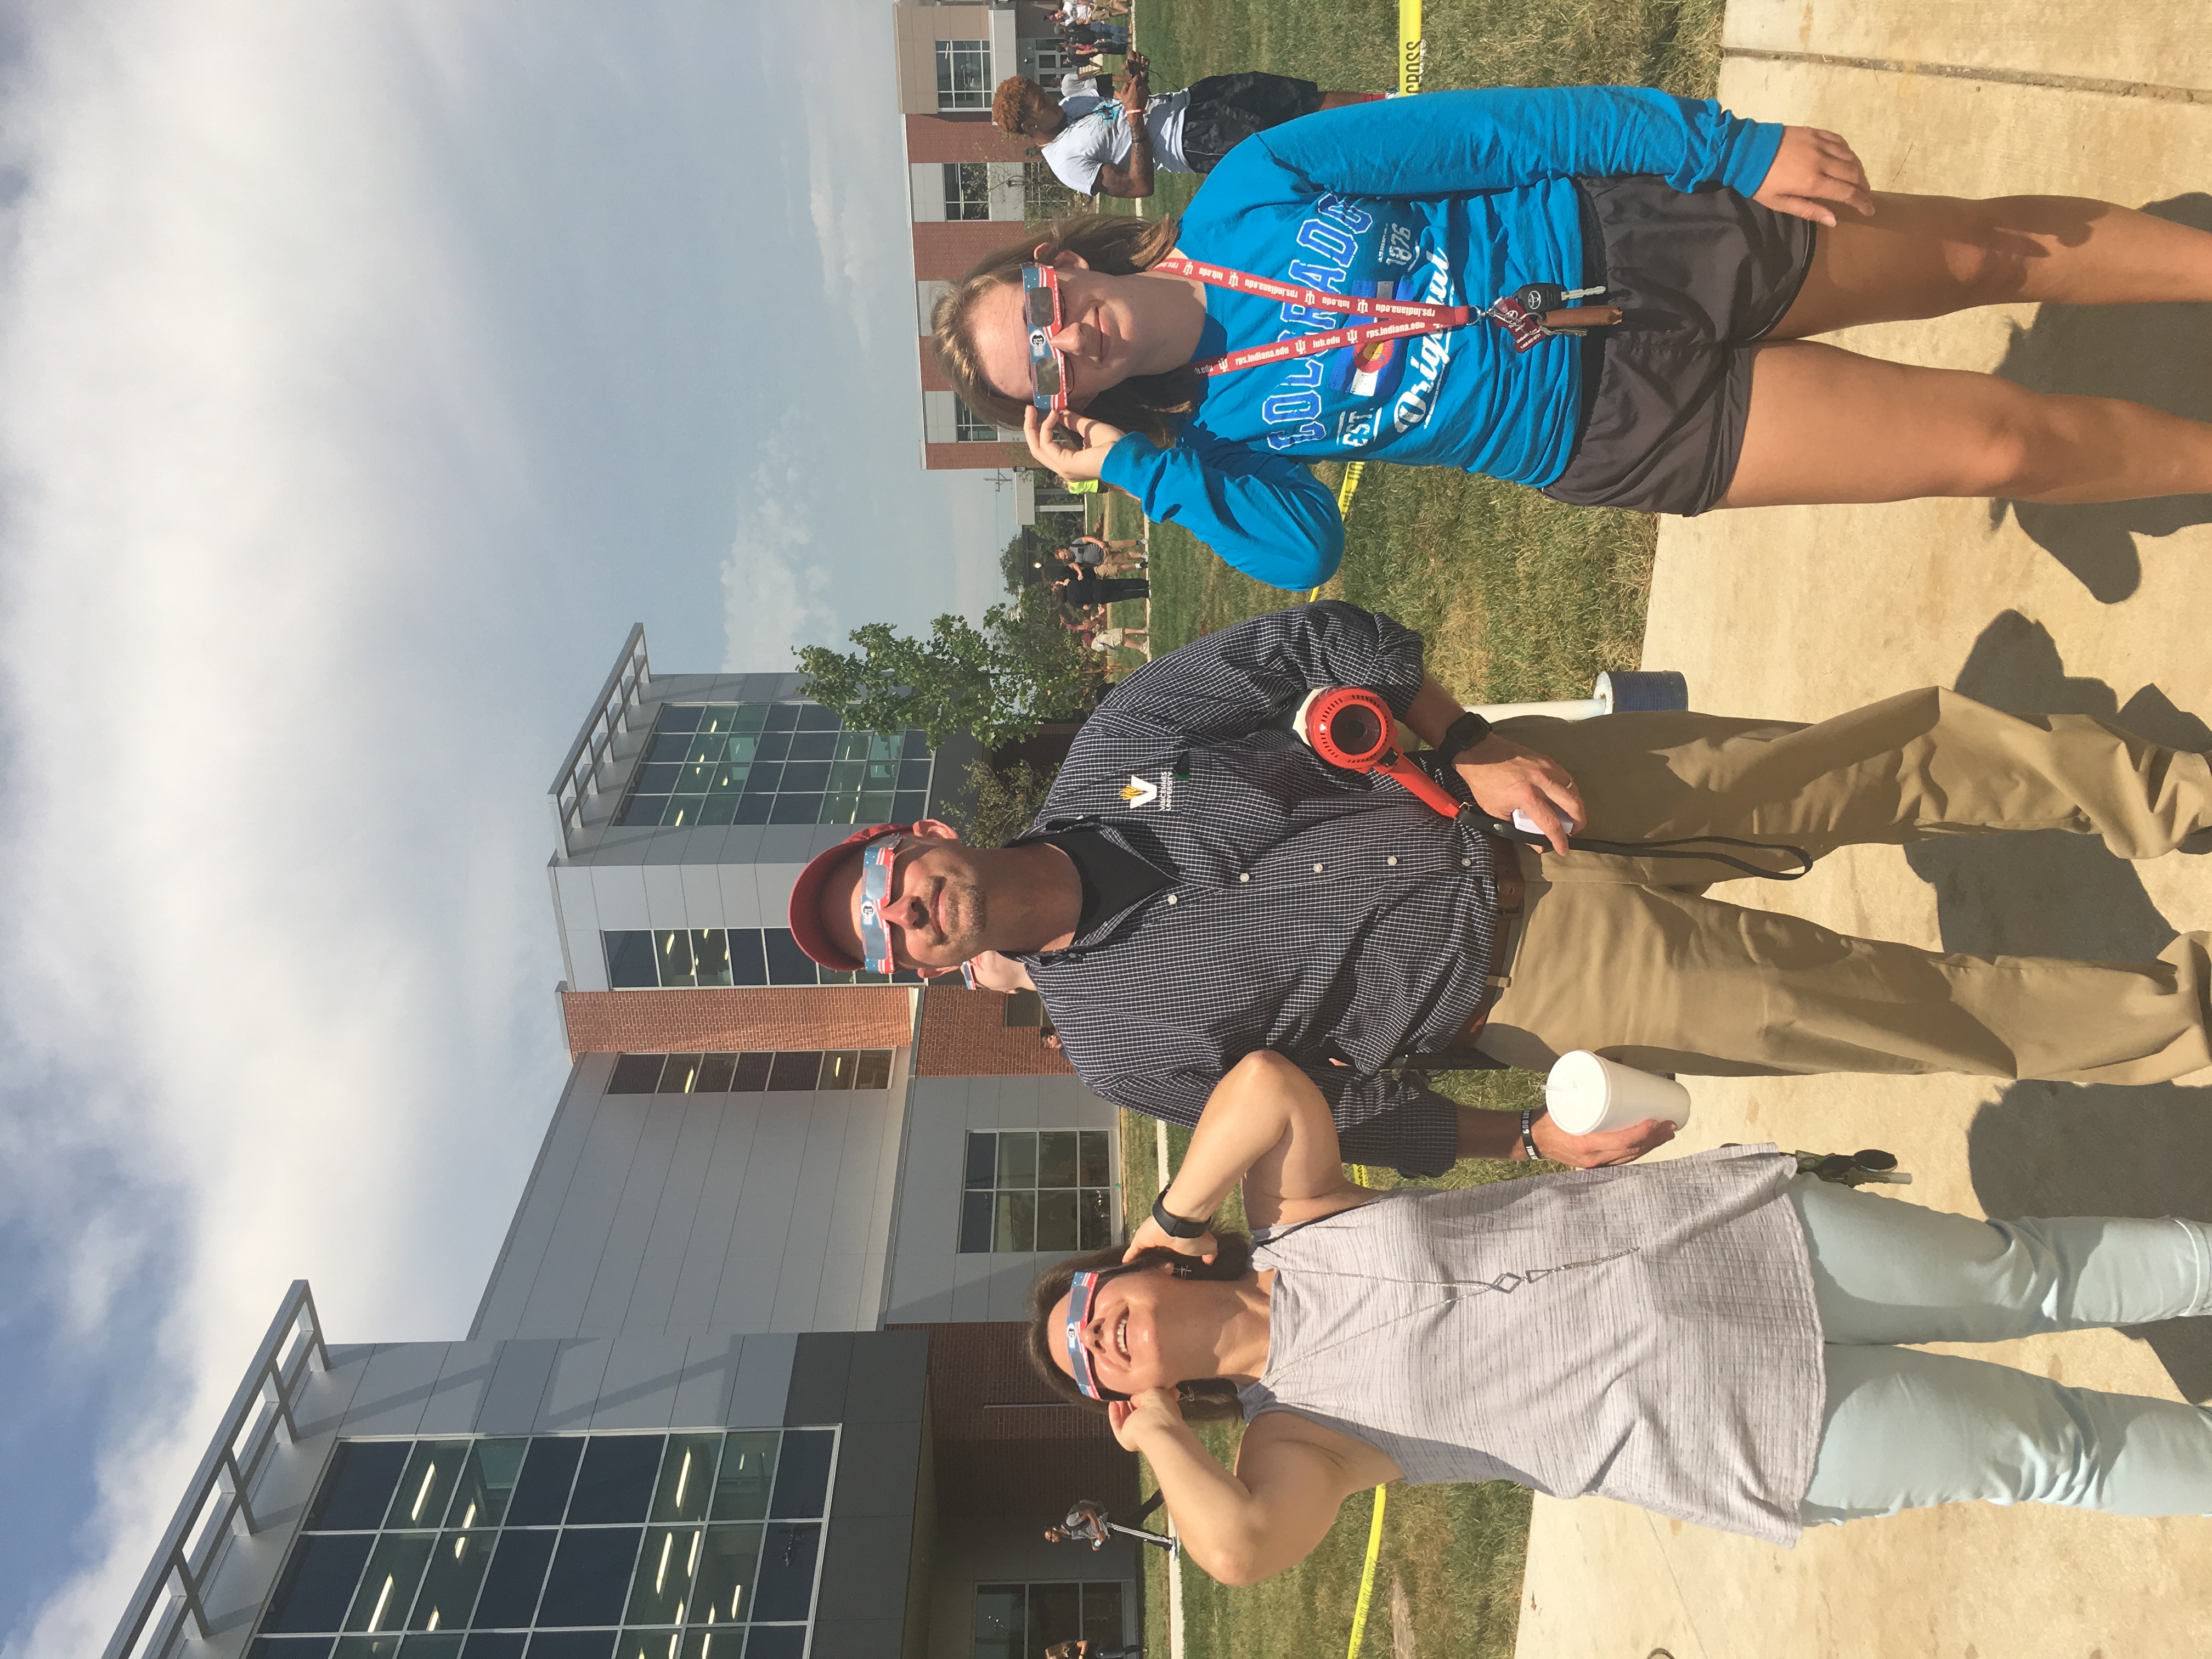 VU Dean Curt Coffman and 2 females, all wearing solar eclipse glasses, look up at the sky while standing near Updike Hall during the 2017 total solar eclipse. 